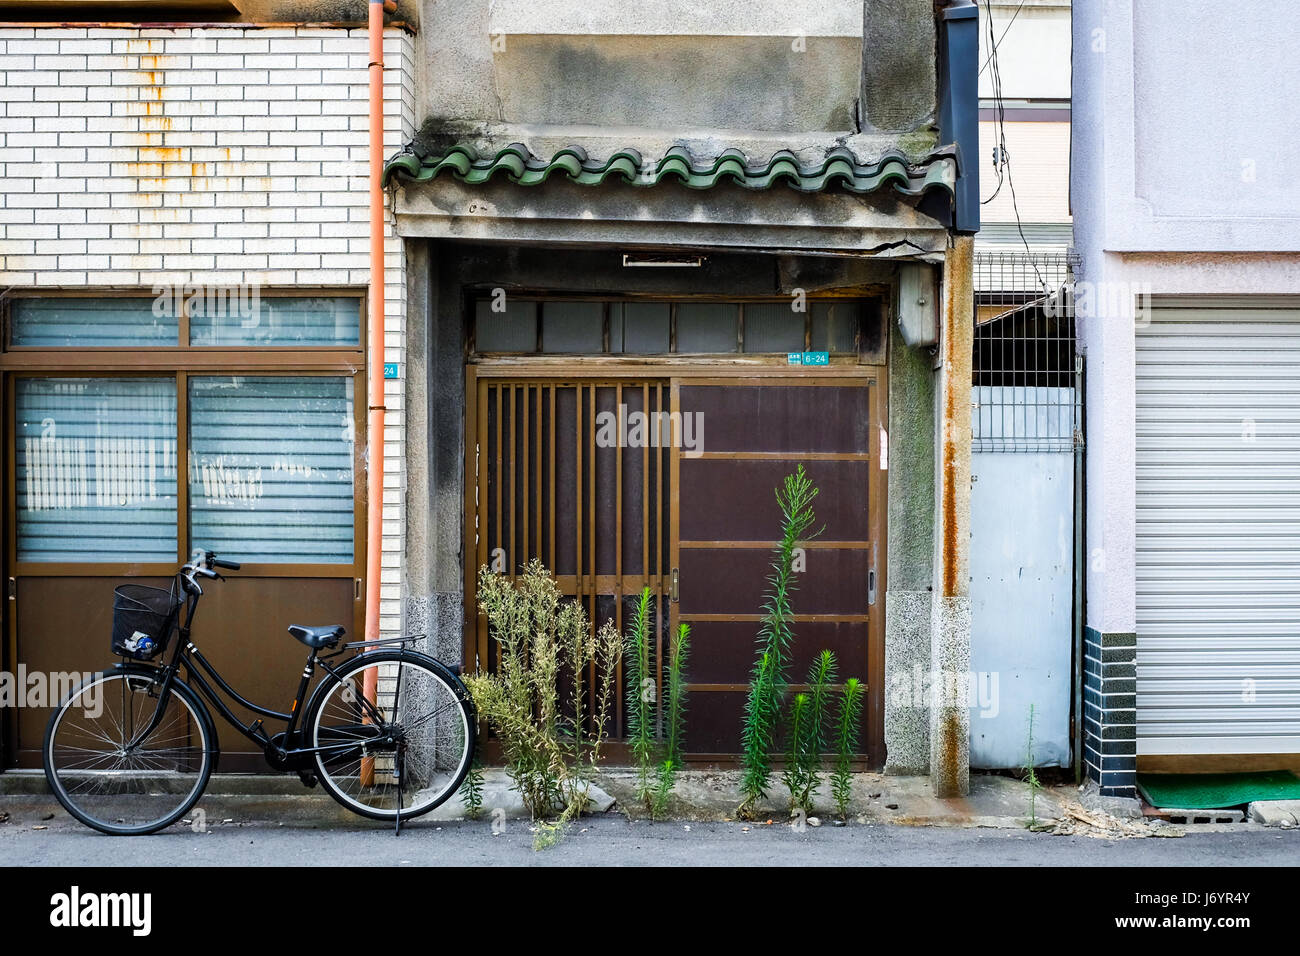 A home – presumably empty – in Japan with plants growing outside the front door. Stock Photo